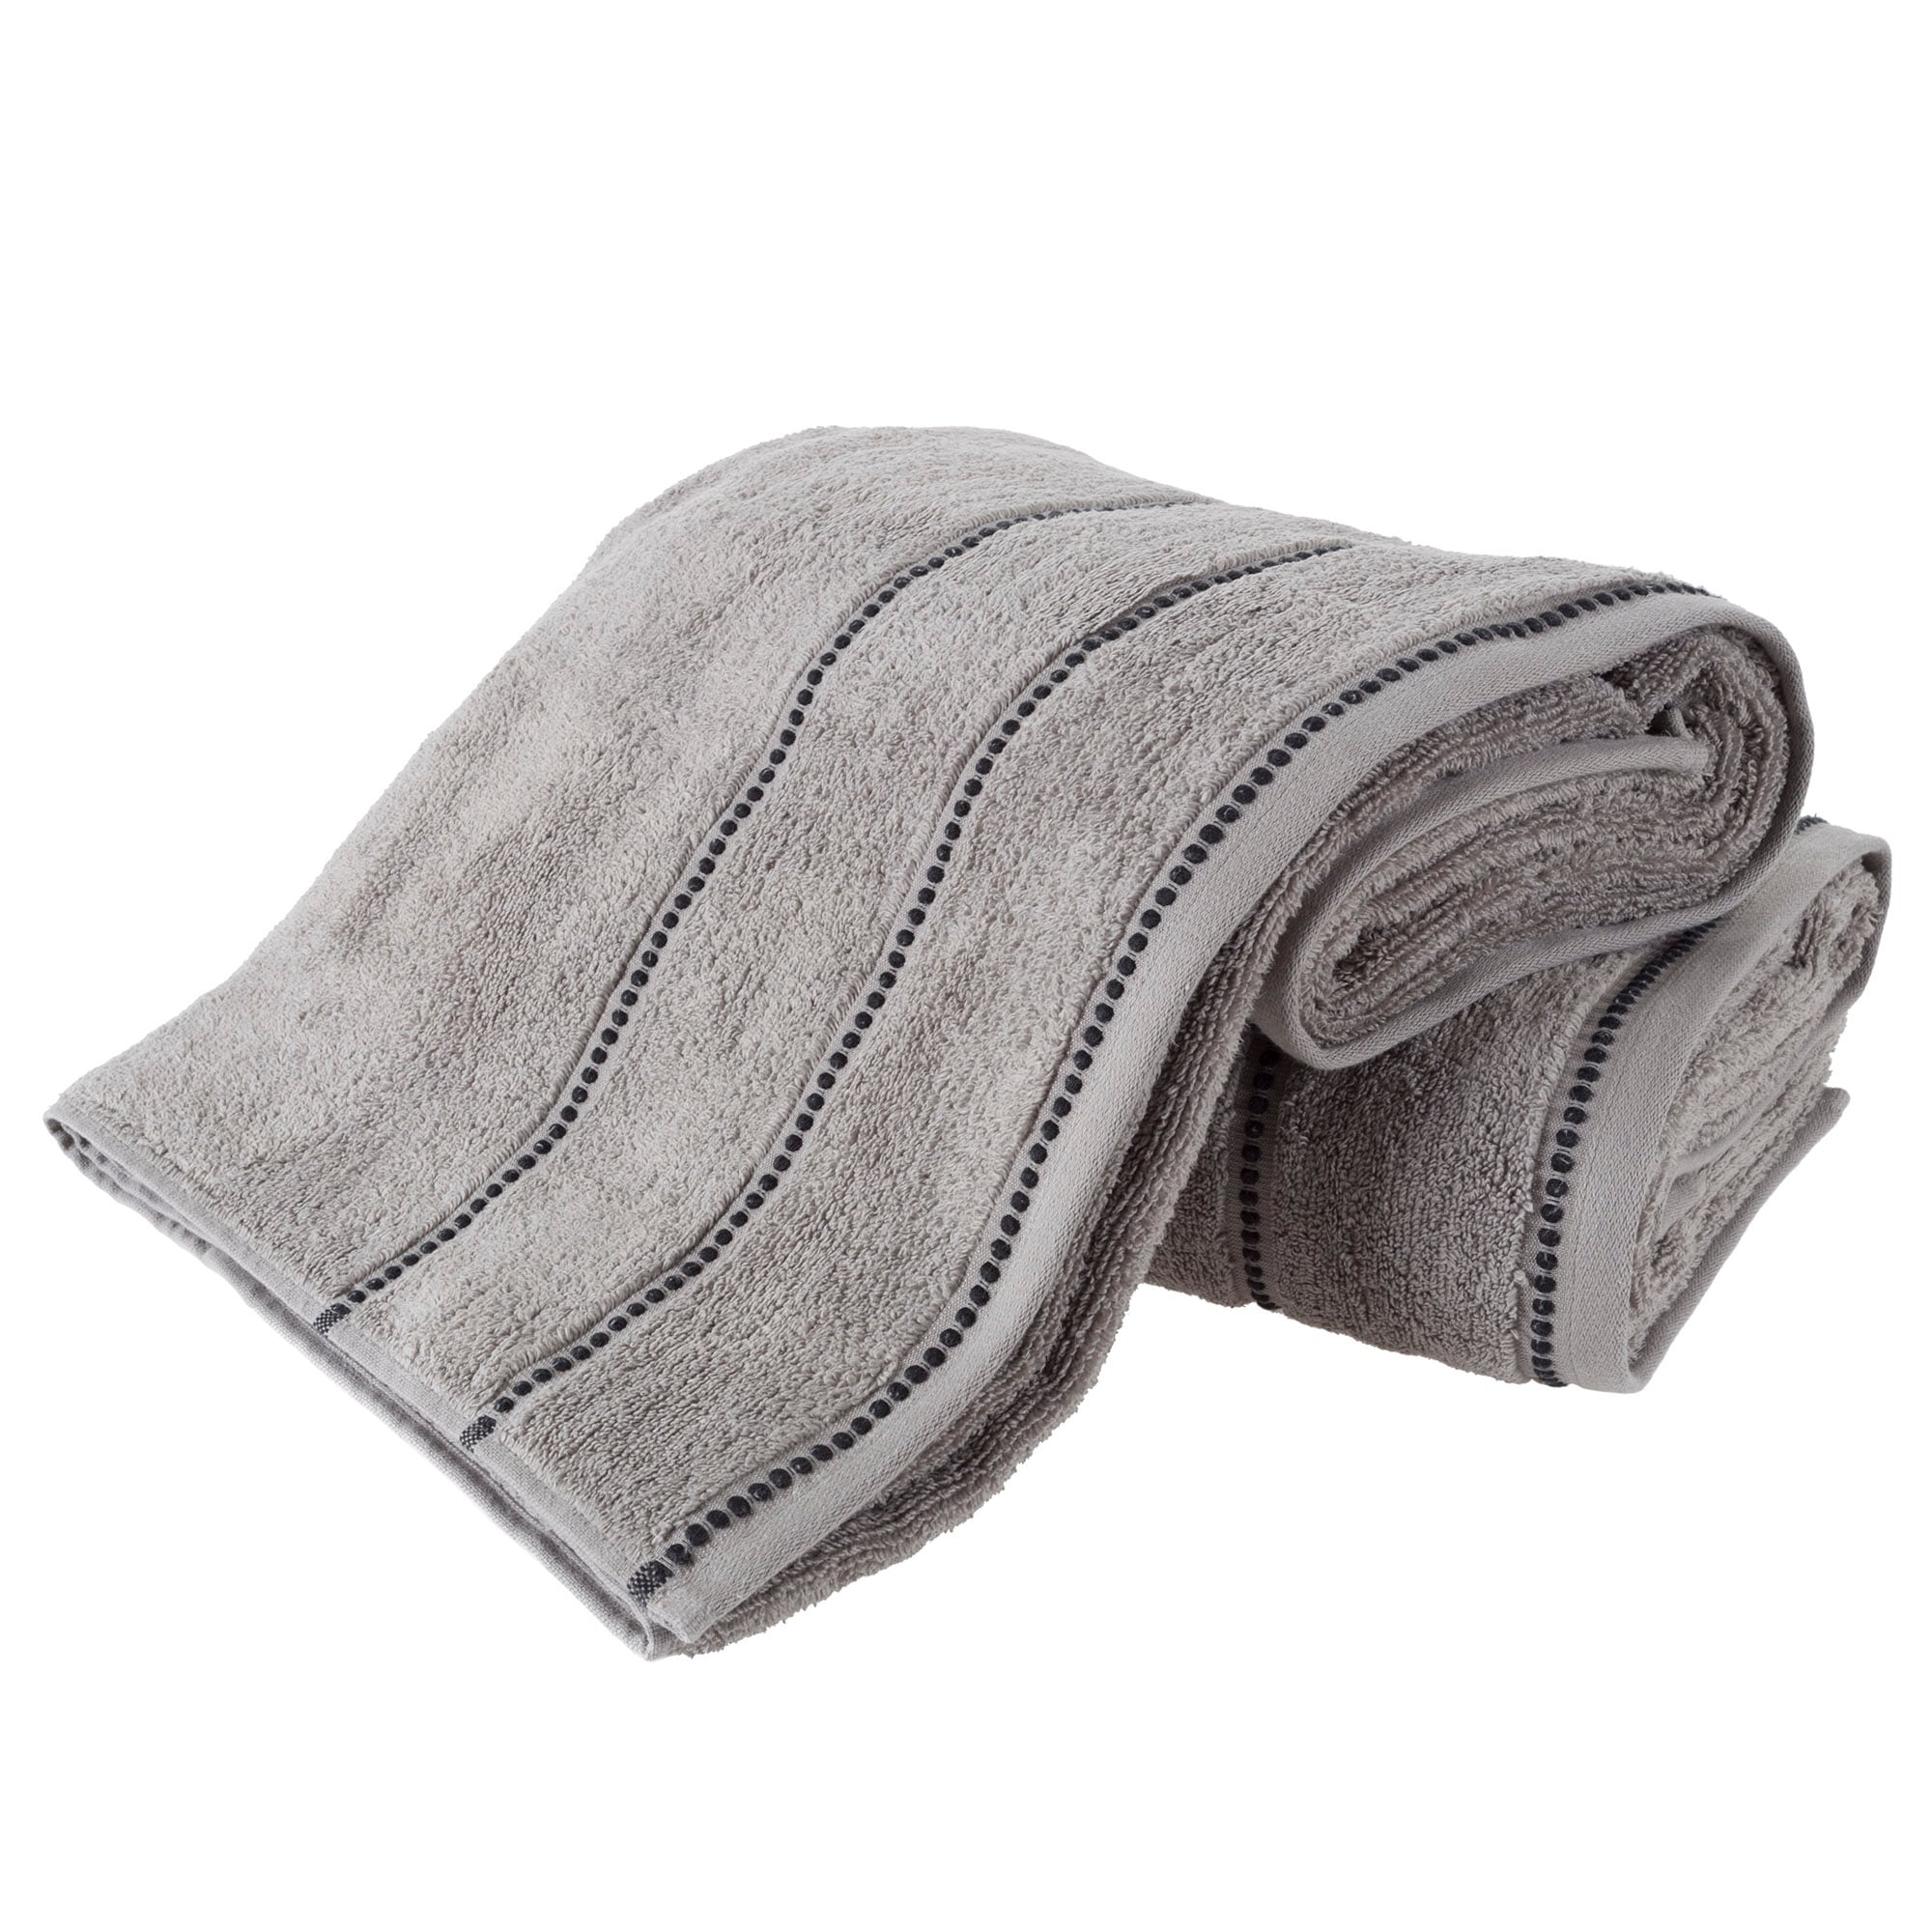 https://ak1.ostkcdn.com/images/products/is/images/direct/09a1d1f8b7eeac2c1a9f5356a27c66bf2f18e9f4/2-Piece-Luxury-Cotton-Towel-Set---Quick-Drying-100%25-Zero-Twist-Cotton-Bath-Towels-by-Windsor-Home.jpg